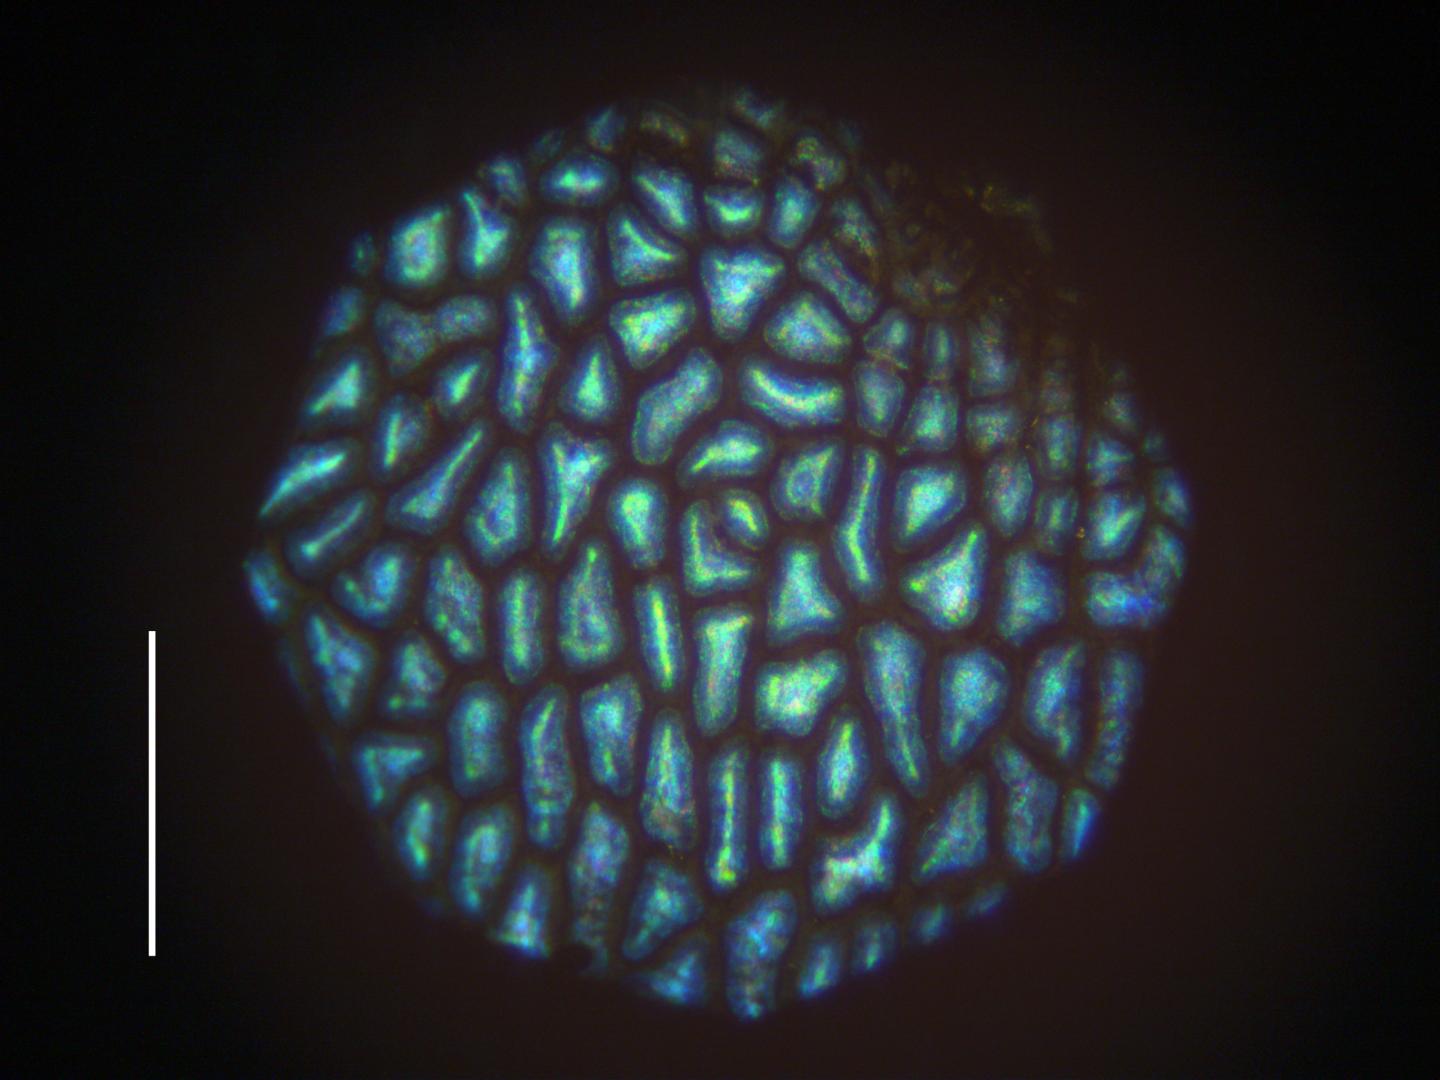 Microscopic Image of the Fruit's Surface